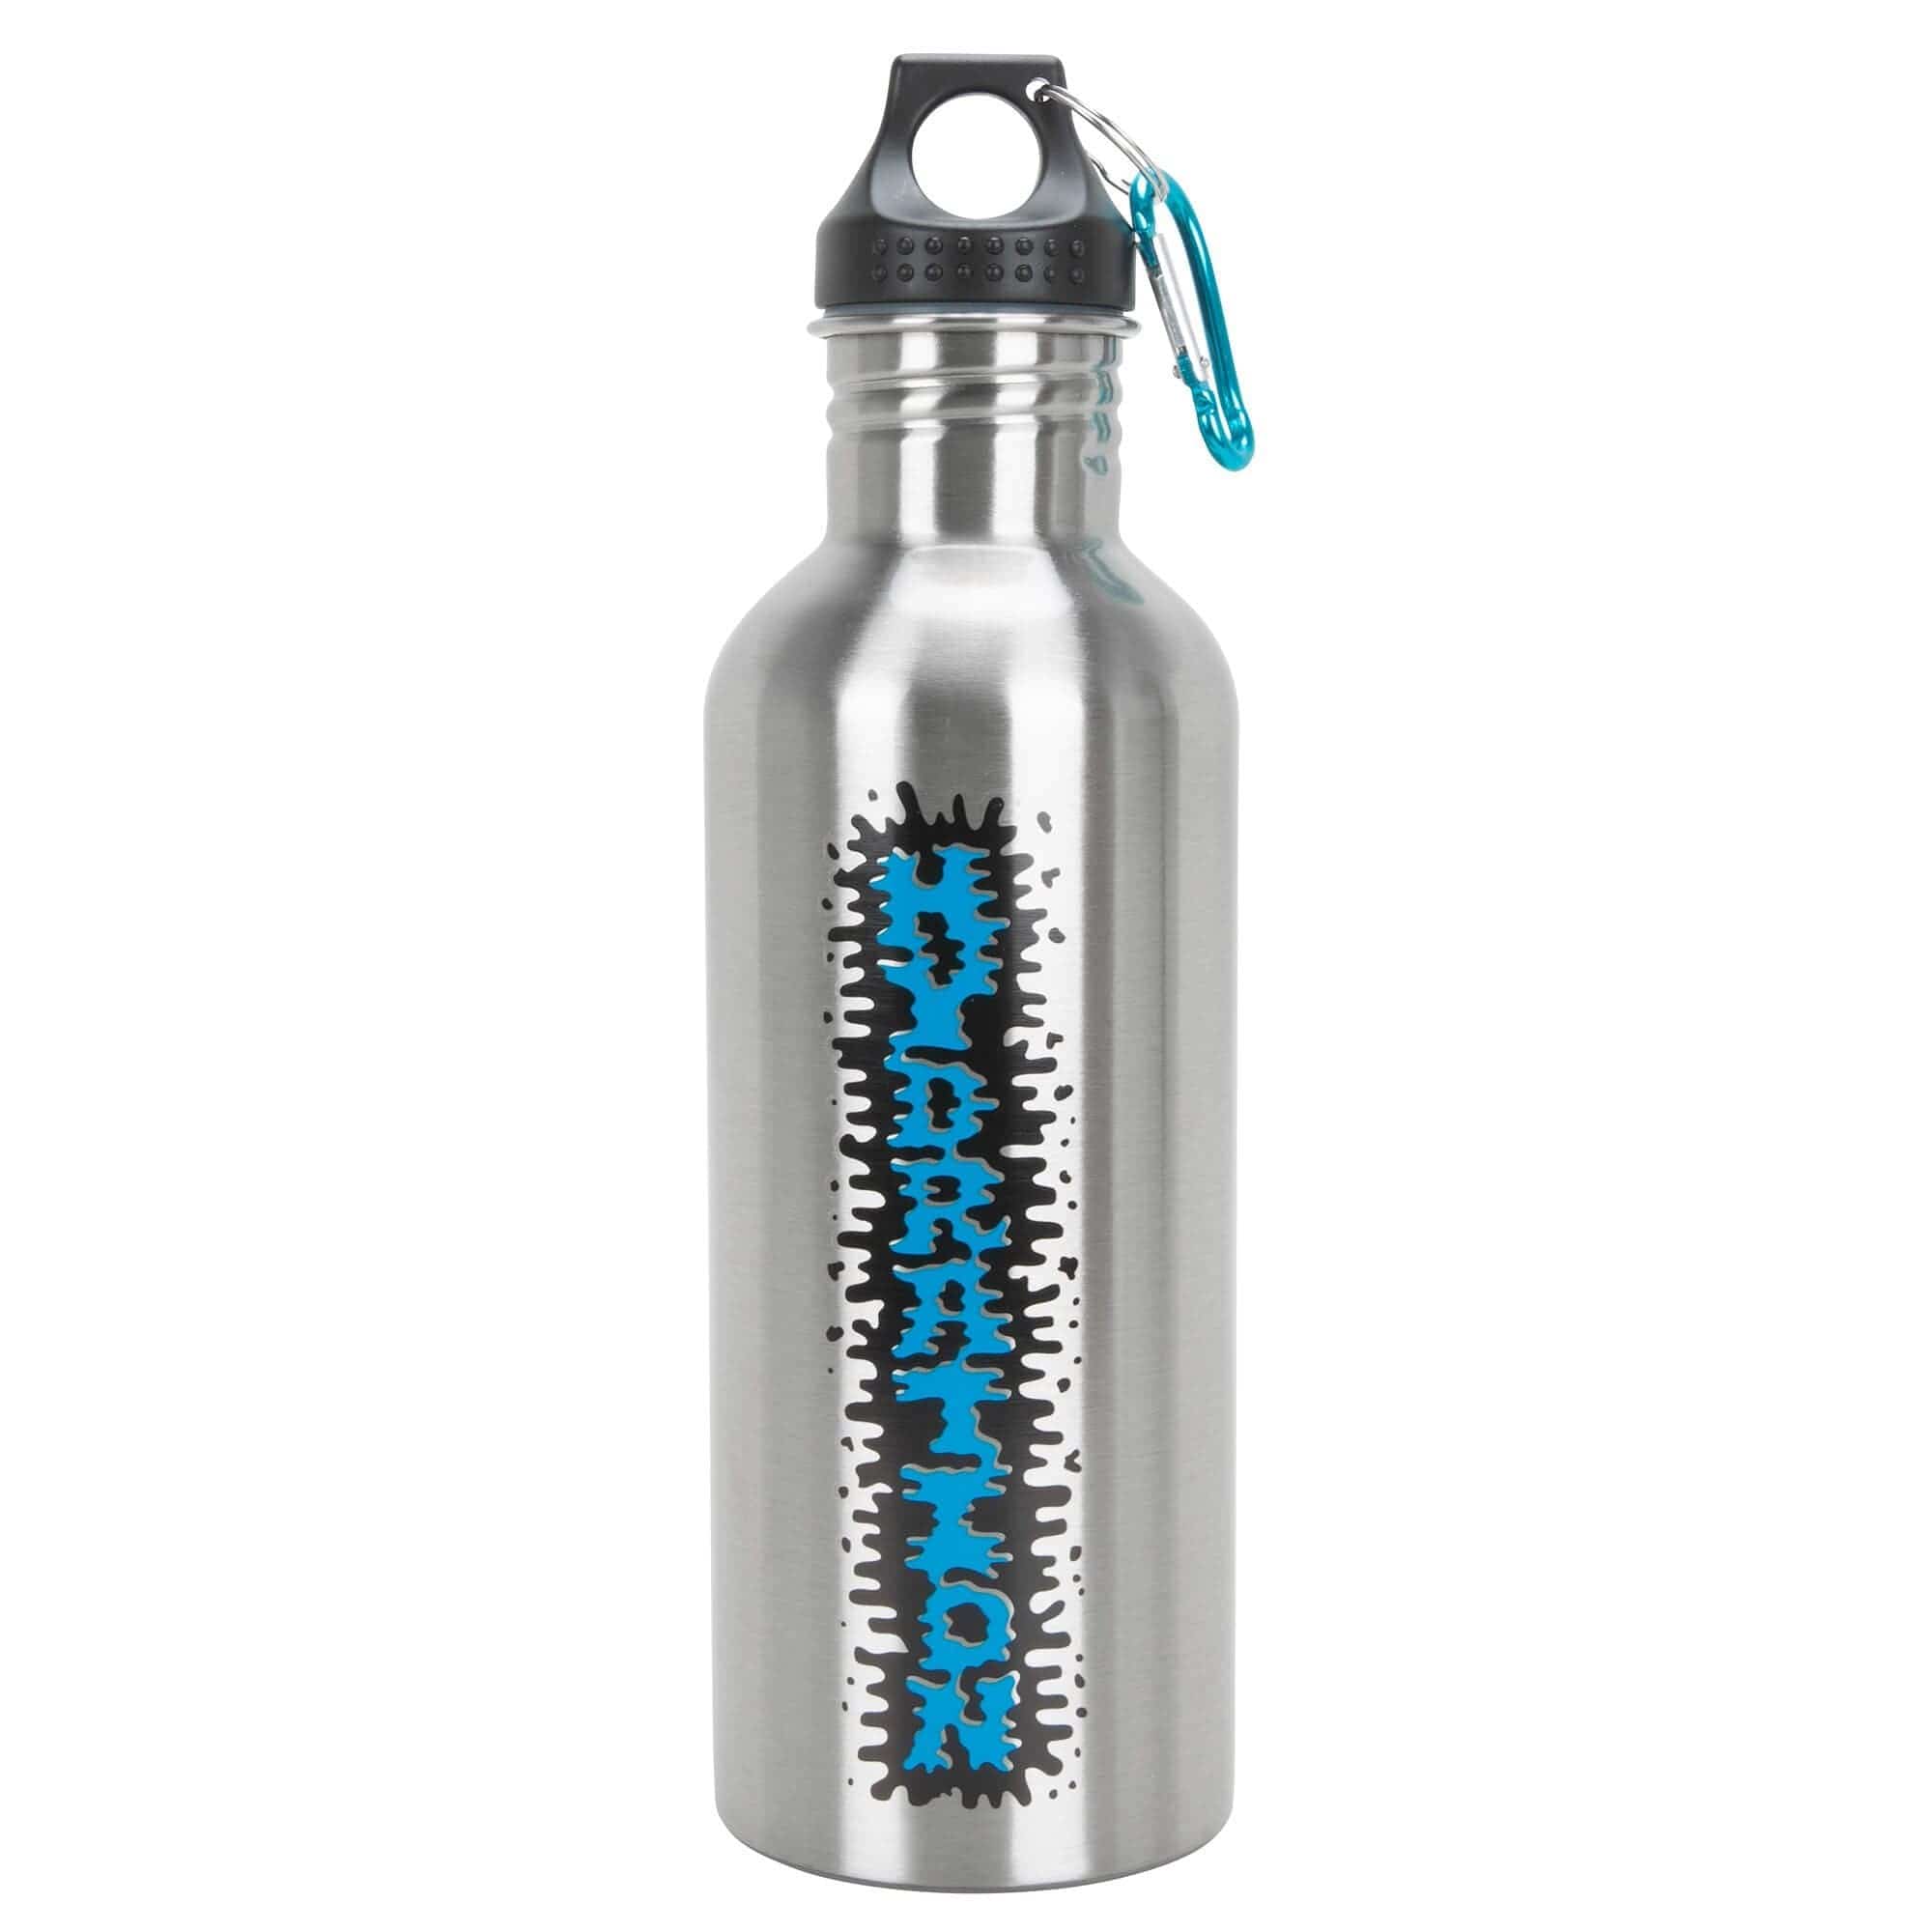 Lowbrow Customs Stainless Steel Water Bottle and Black Carrier 2.0